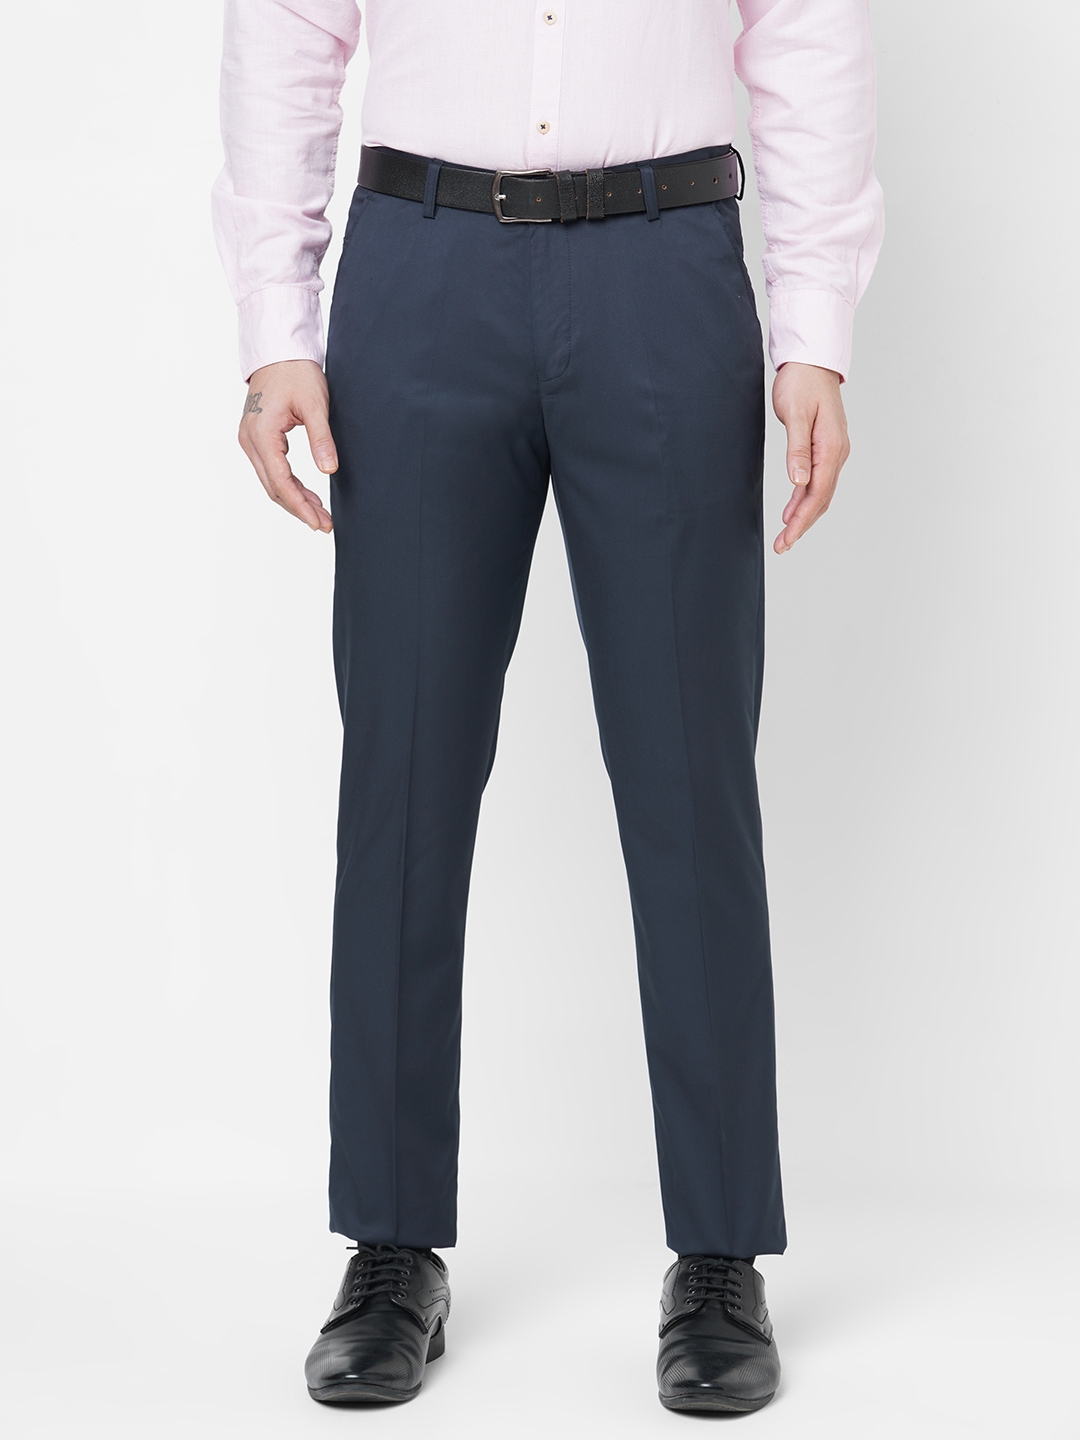 Men's Blue Polyester Solid Flat Front Formal Trousers